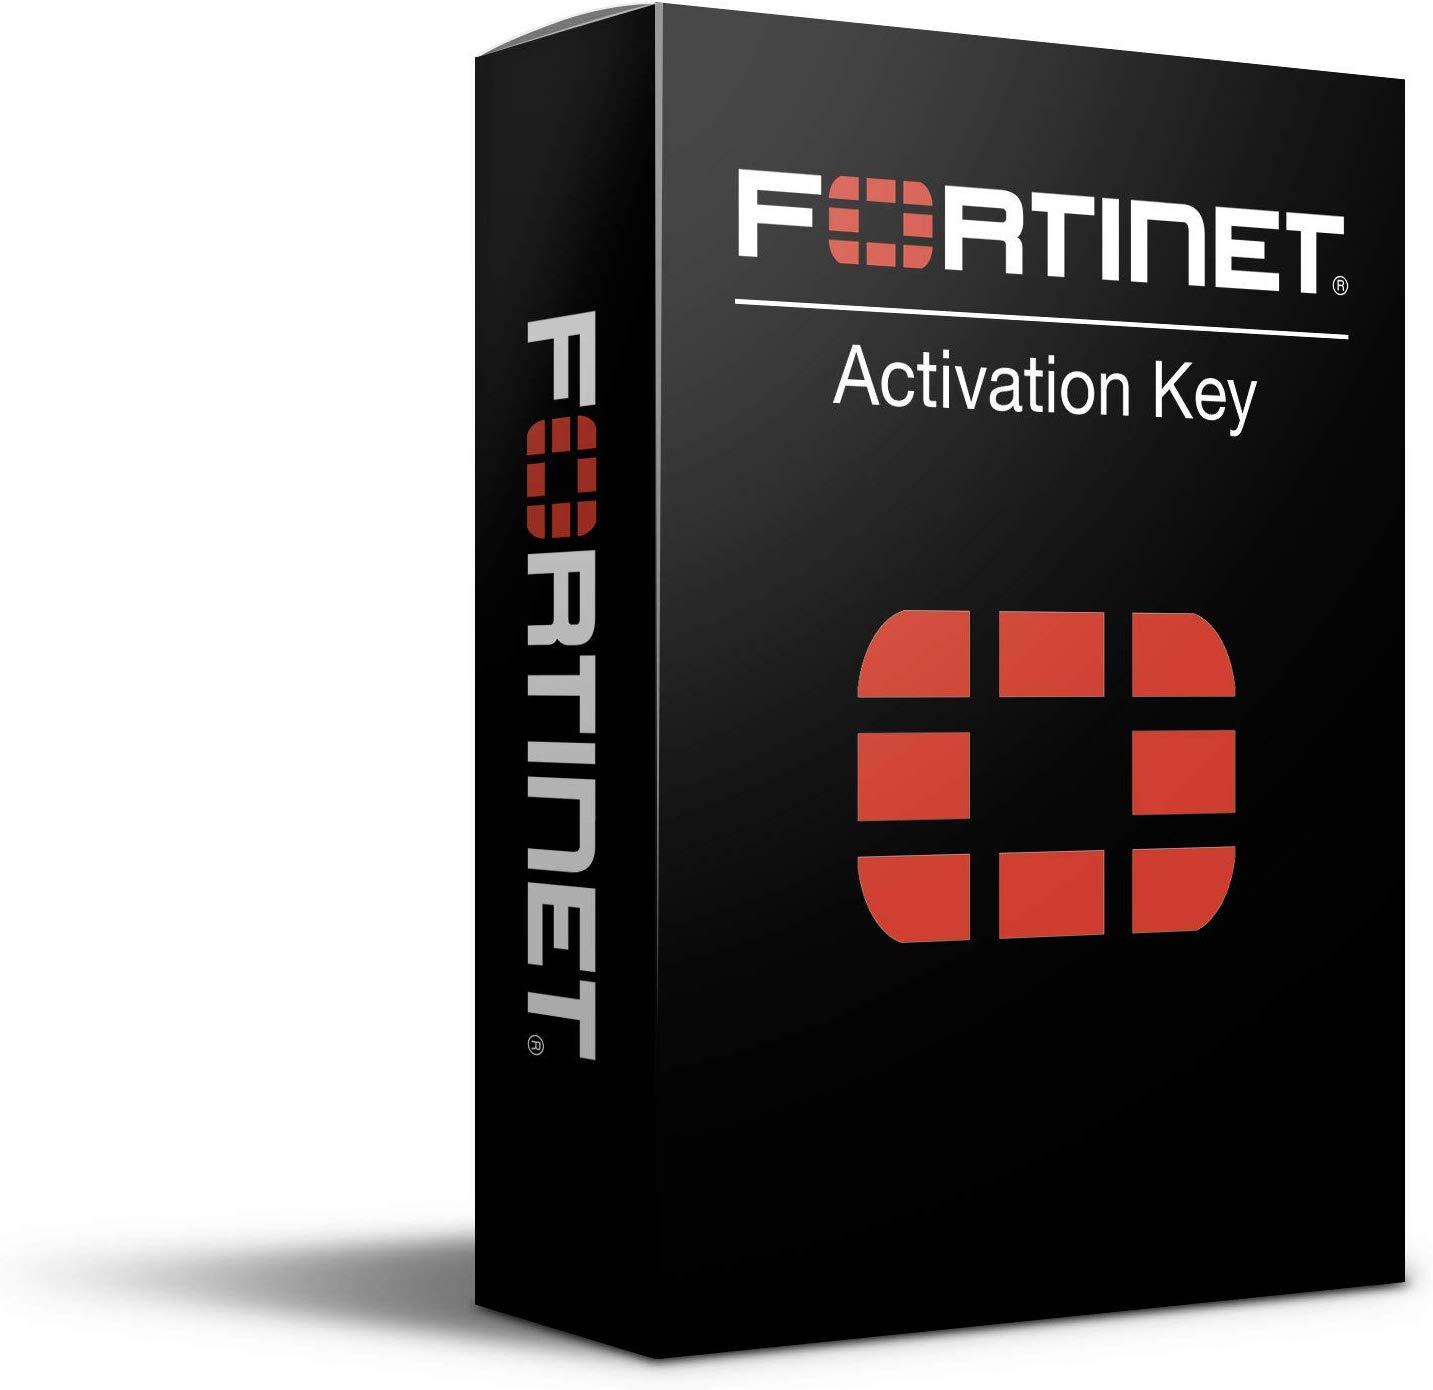 Fortinet FortiClient Enterprise Management Server License Subscription for 100 Clients for 3 Years - Includes 24x7 Support.